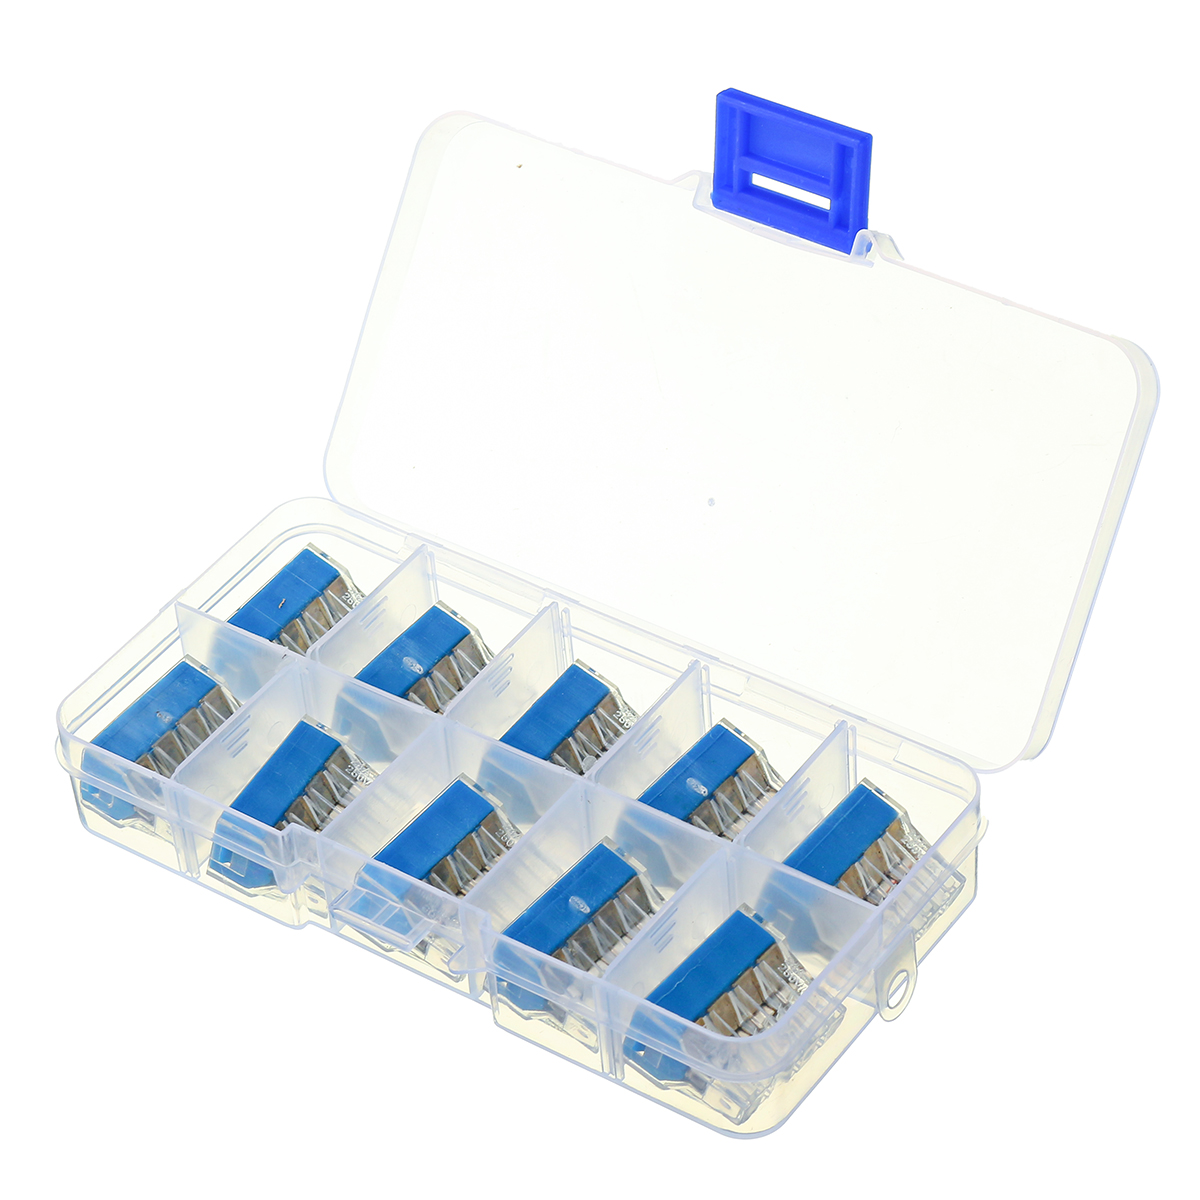 10Pcs-8-Holes-Universal-Compact-Terminal-Block-Electric-Cable-Wire-Connector-1384417-1